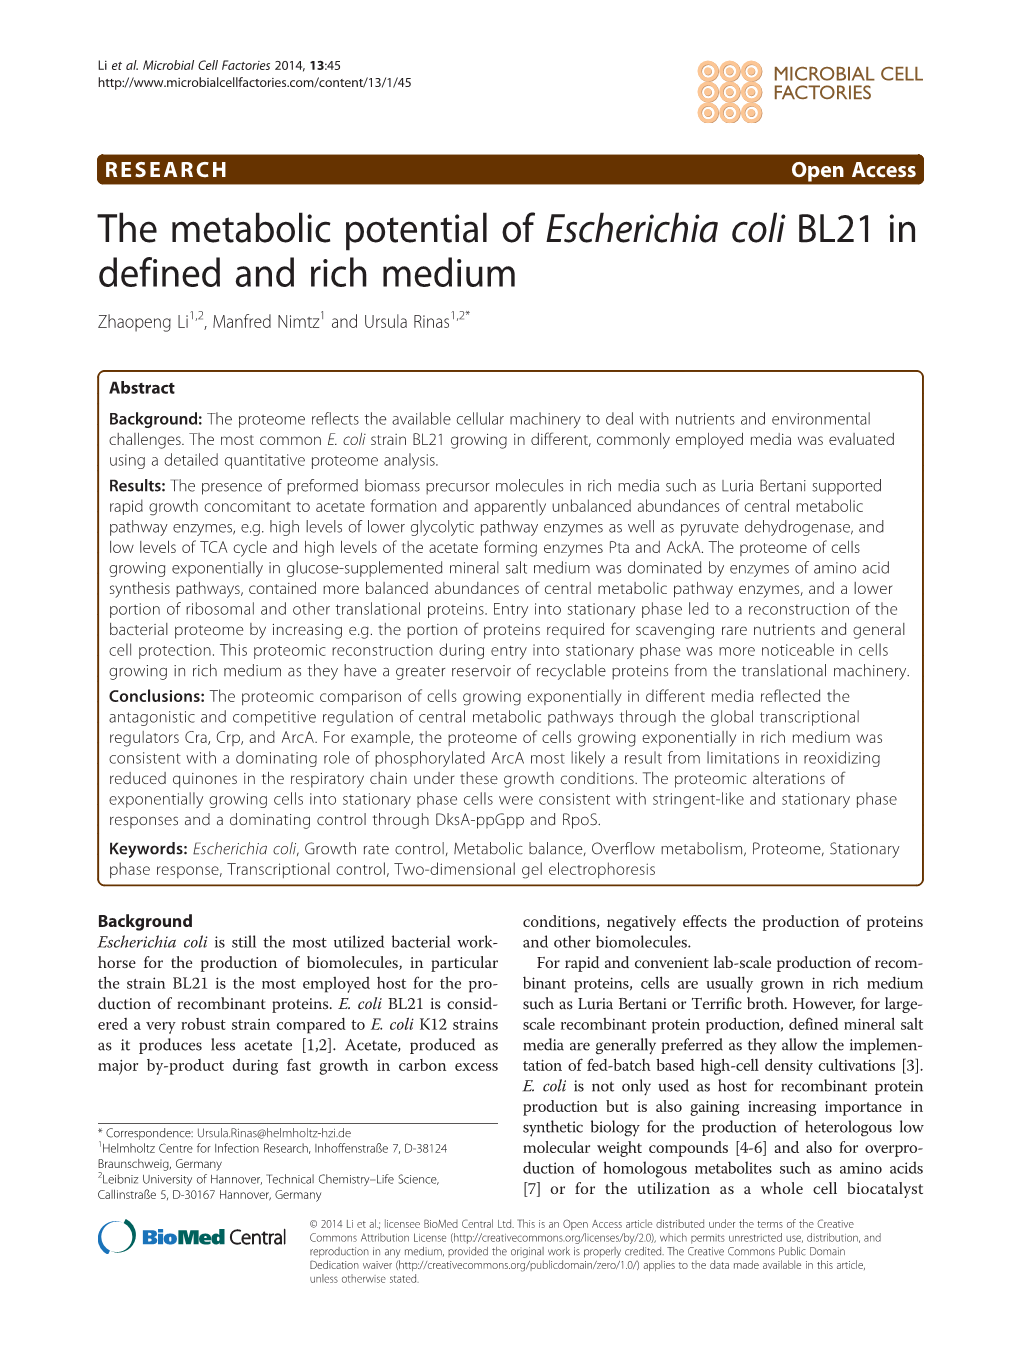 The Metabolic Potential of Escherichia Coli BL21 in Defined and Rich Medium Zhaopeng Li1,2, Manfred Nimtz1 and Ursula Rinas1,2*